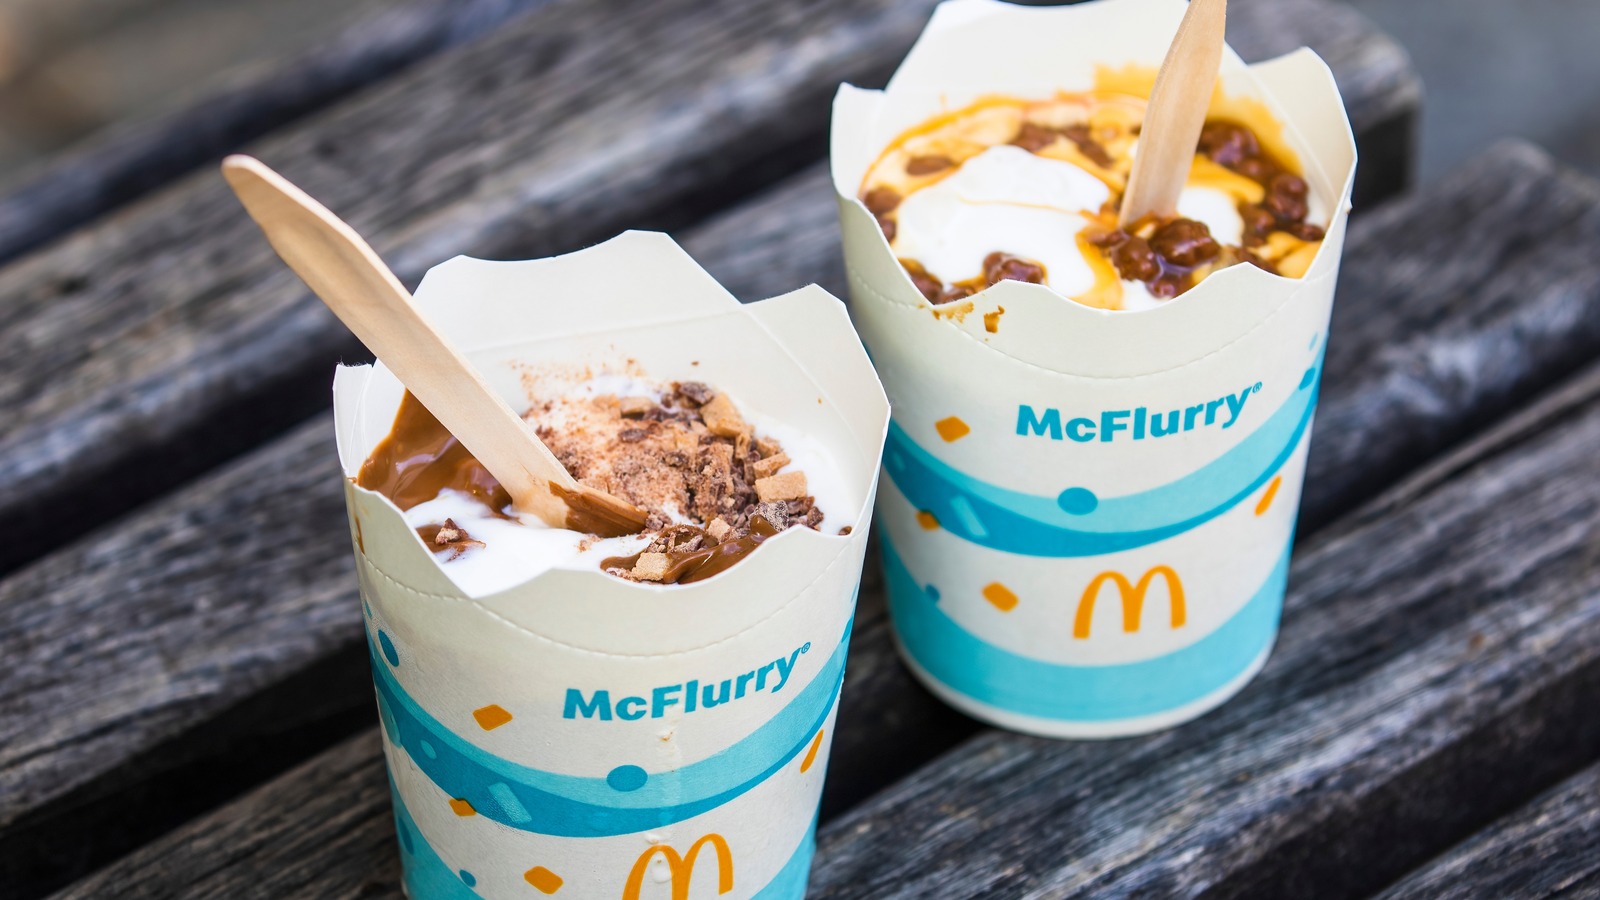 15 Mcflurry Nutrition Facts You Need to Know